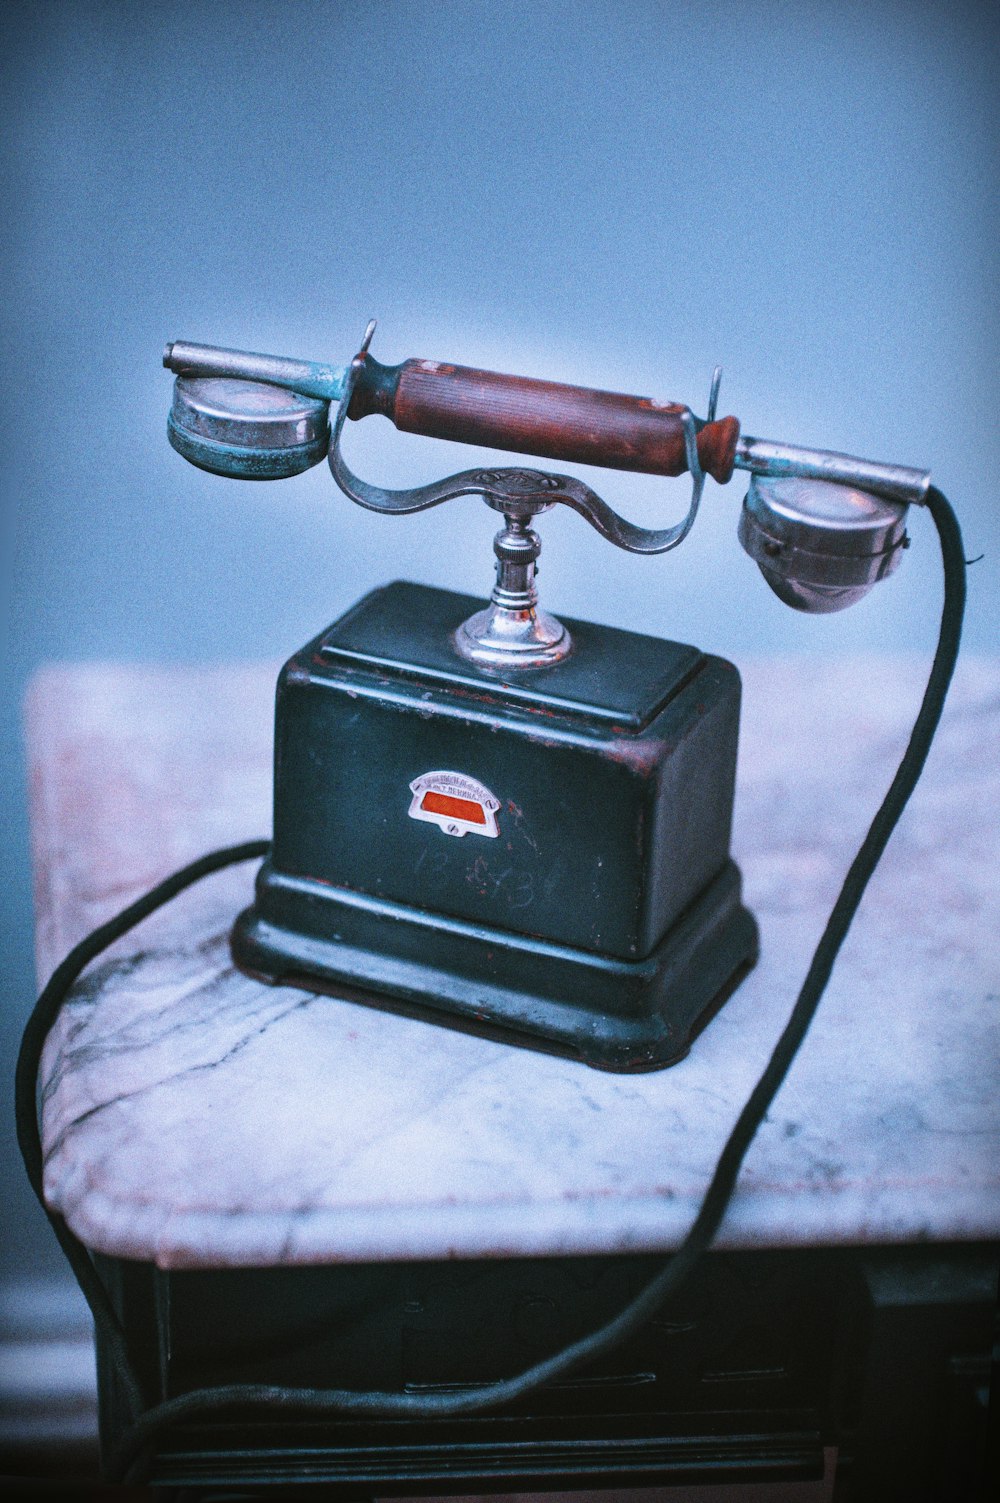 vintage blue and brown telephone on beige surface